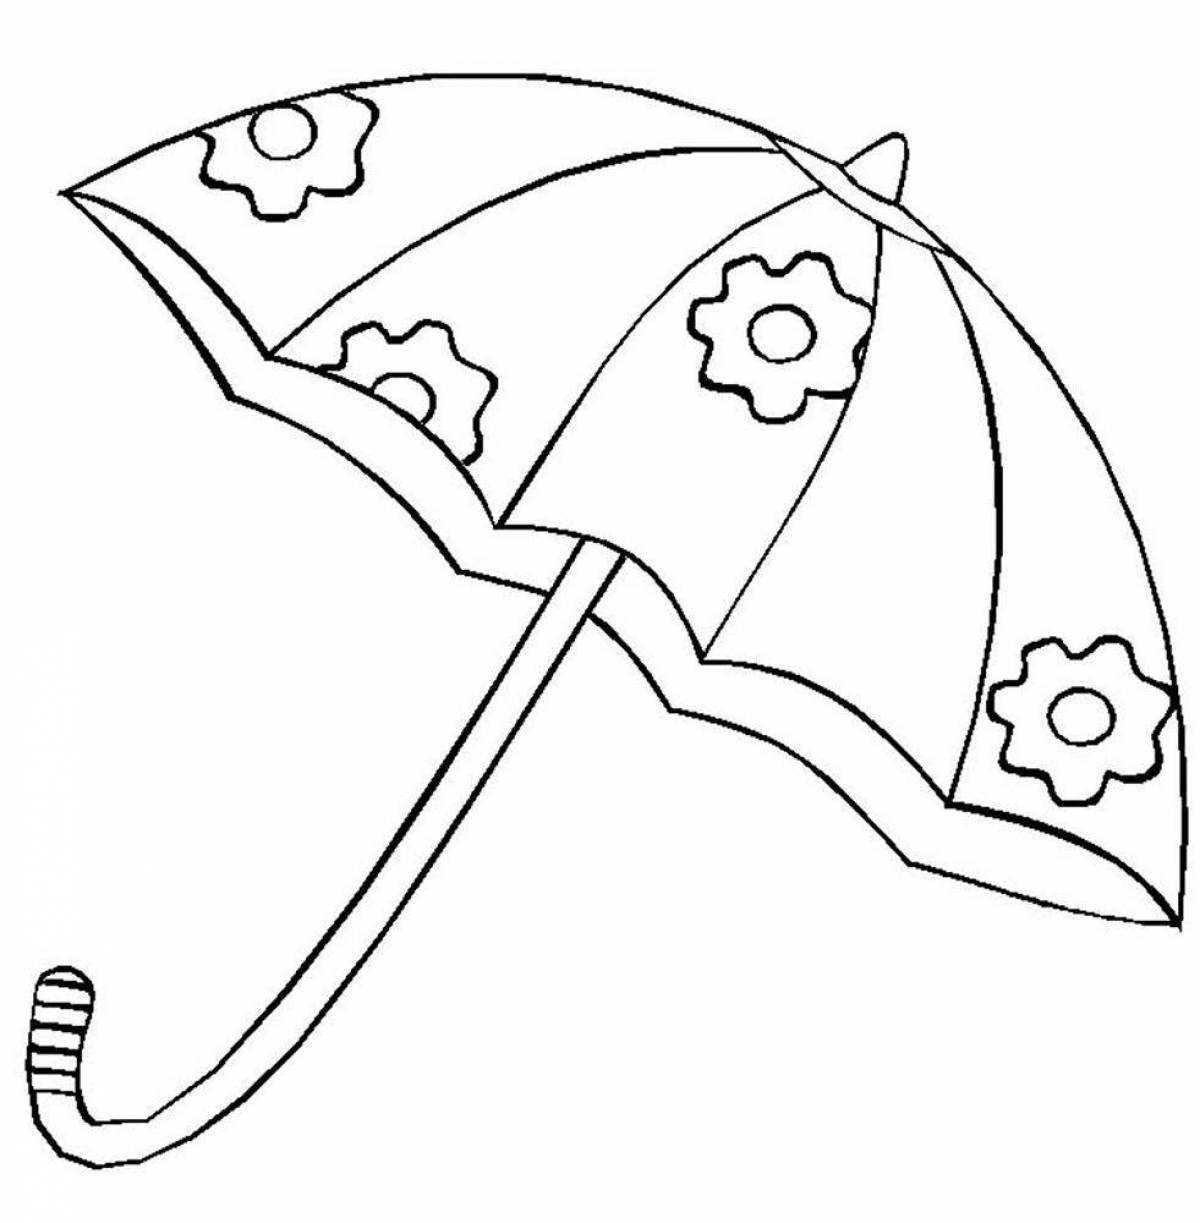 Colourful and sunny umbrella coloring book for kids